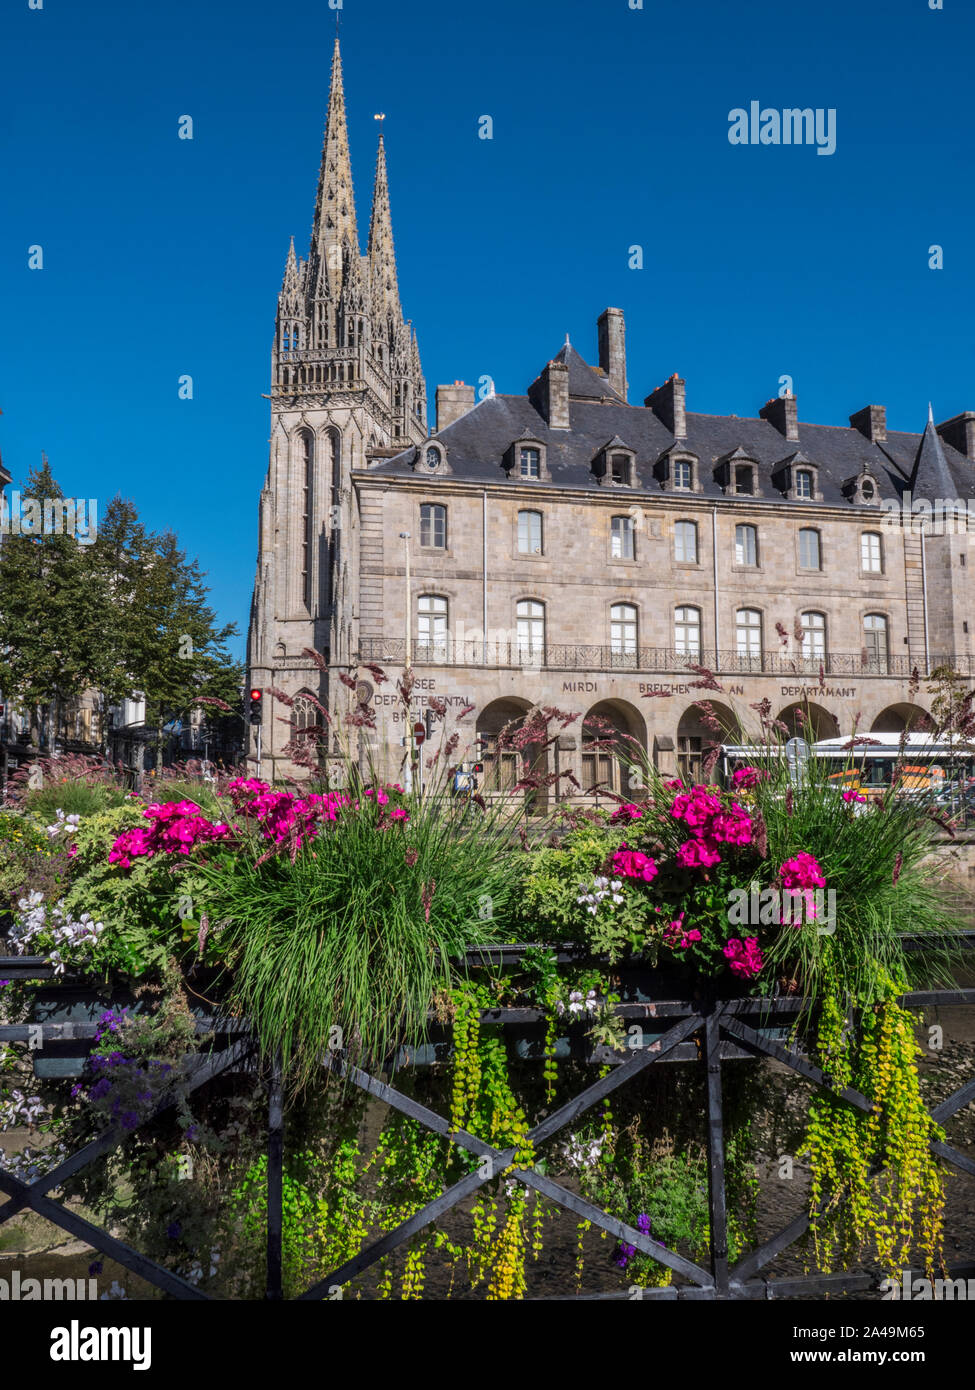 Quimper Musée des Beaux-Arts and Saint Corentin Quimper Cathedral behind viewed from River Odet with street flowers in foreground Brittany France Stock Photo